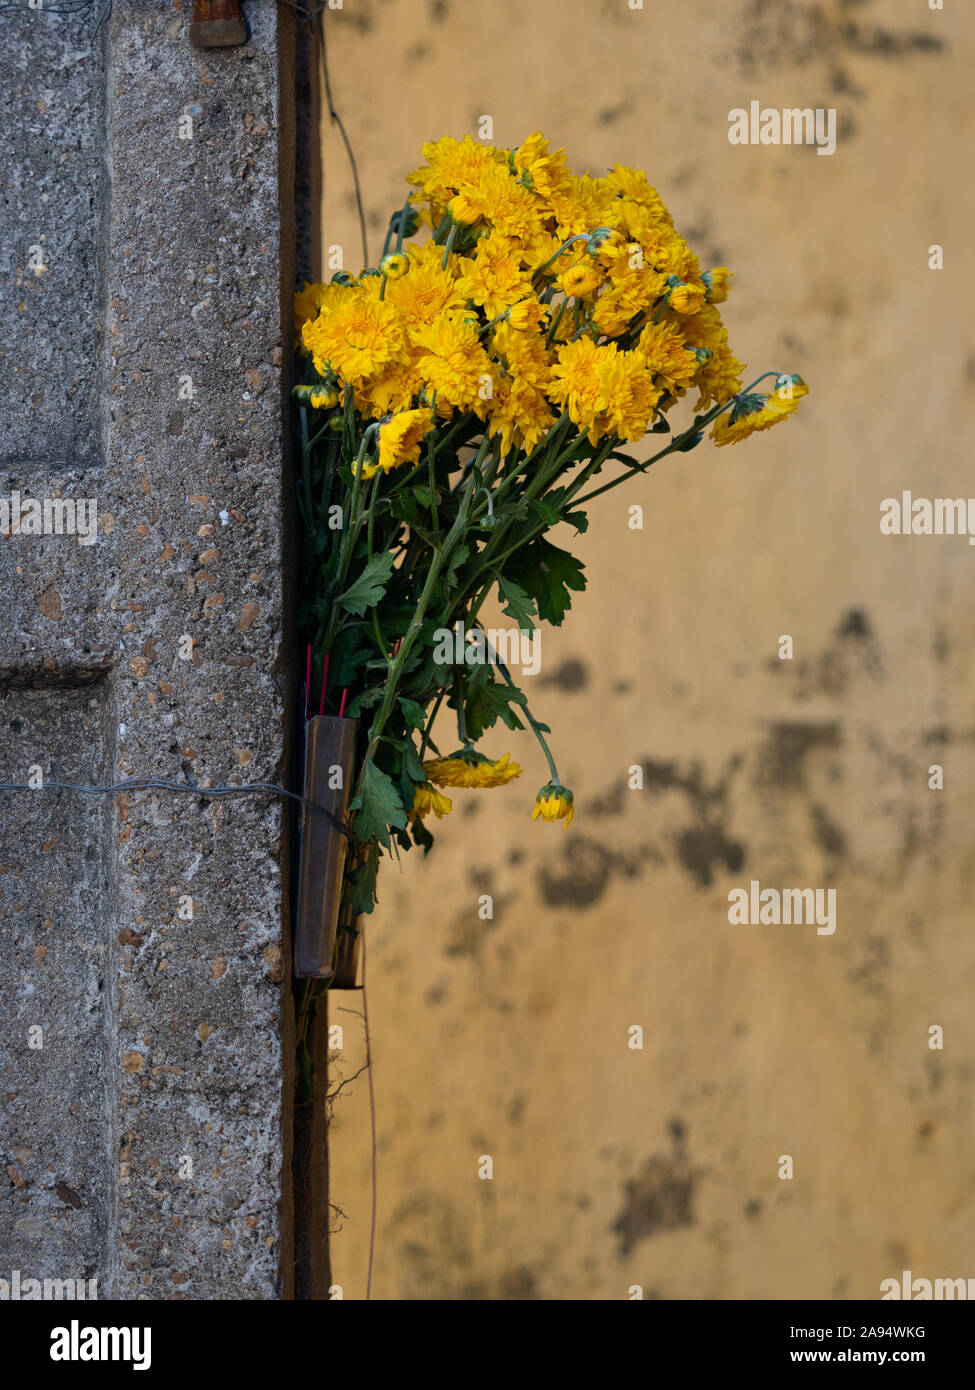 A bunch of golden chrysanthemums in a vase on a concrete wall. A gold stucco wall in the background. Photographed in Hoi An, Vietnam. Stock Photo